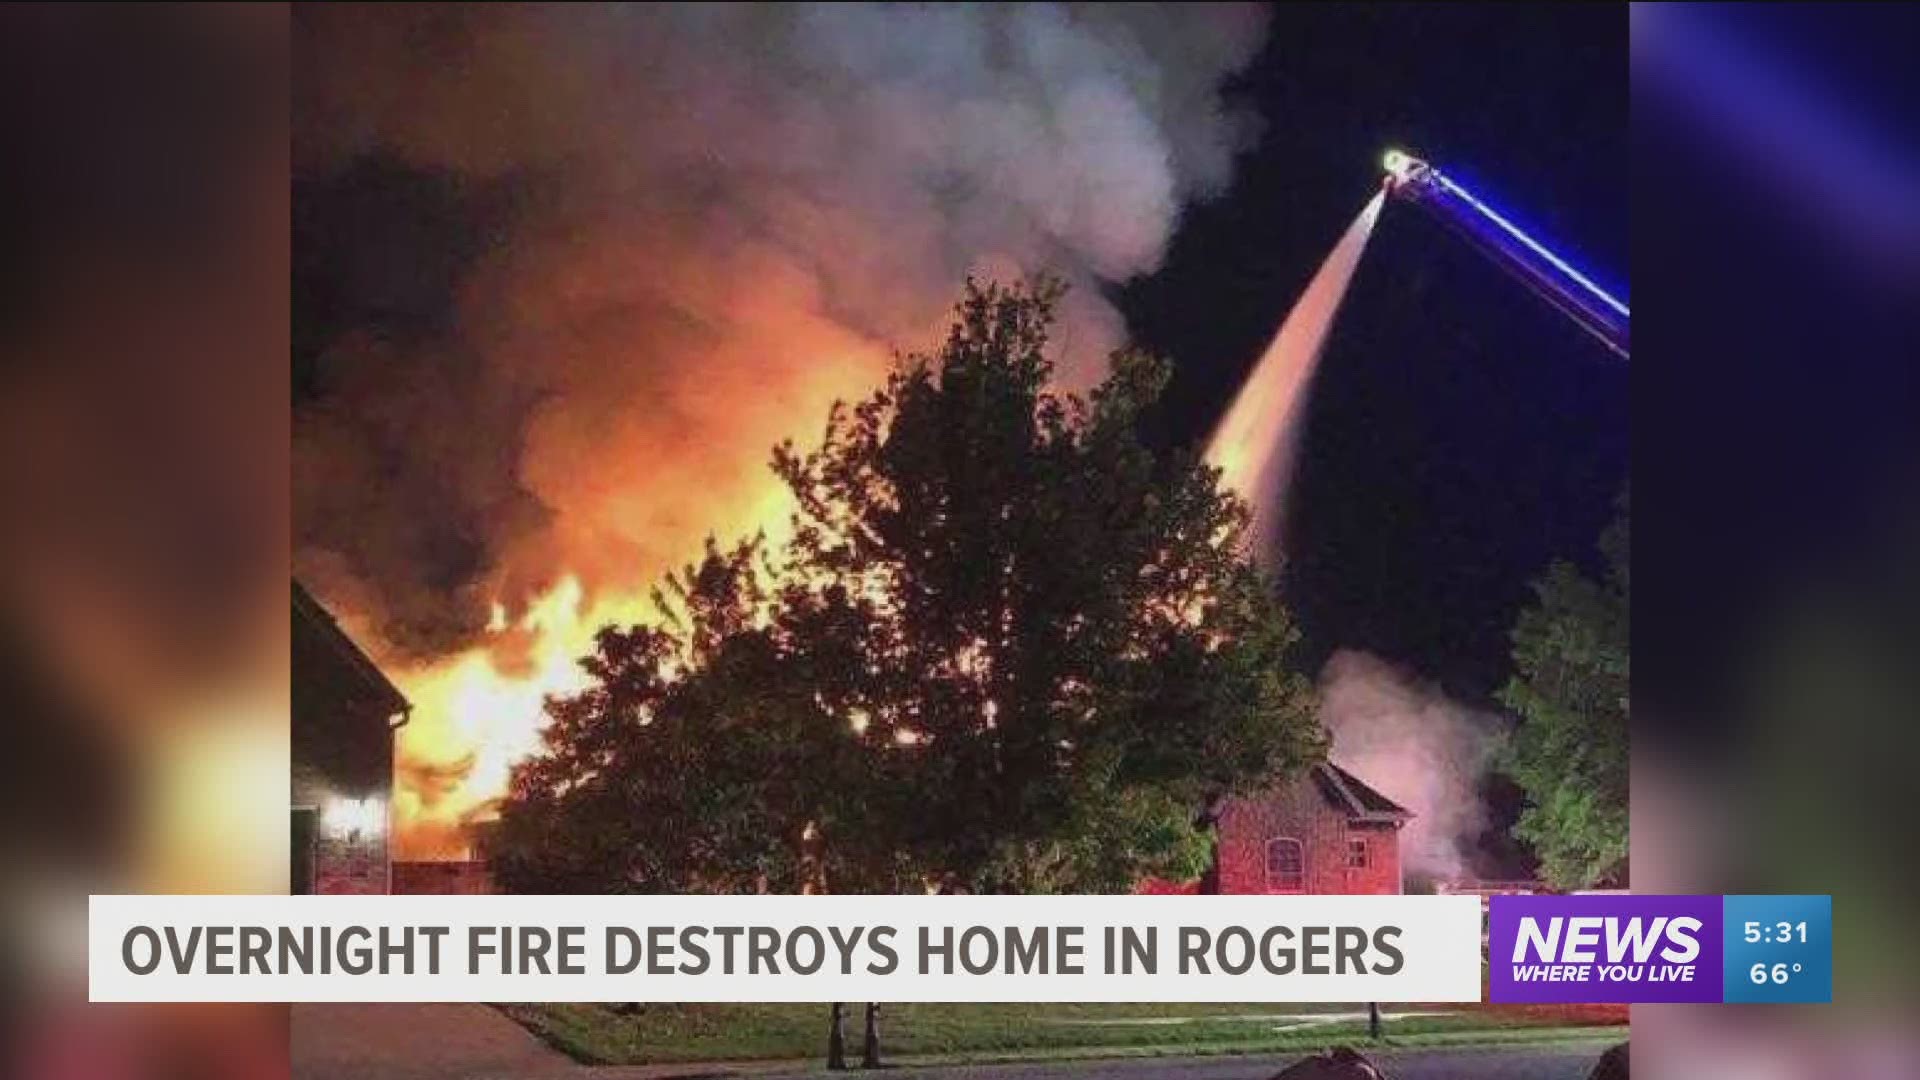 Overnight fire destroys home in Rogers.